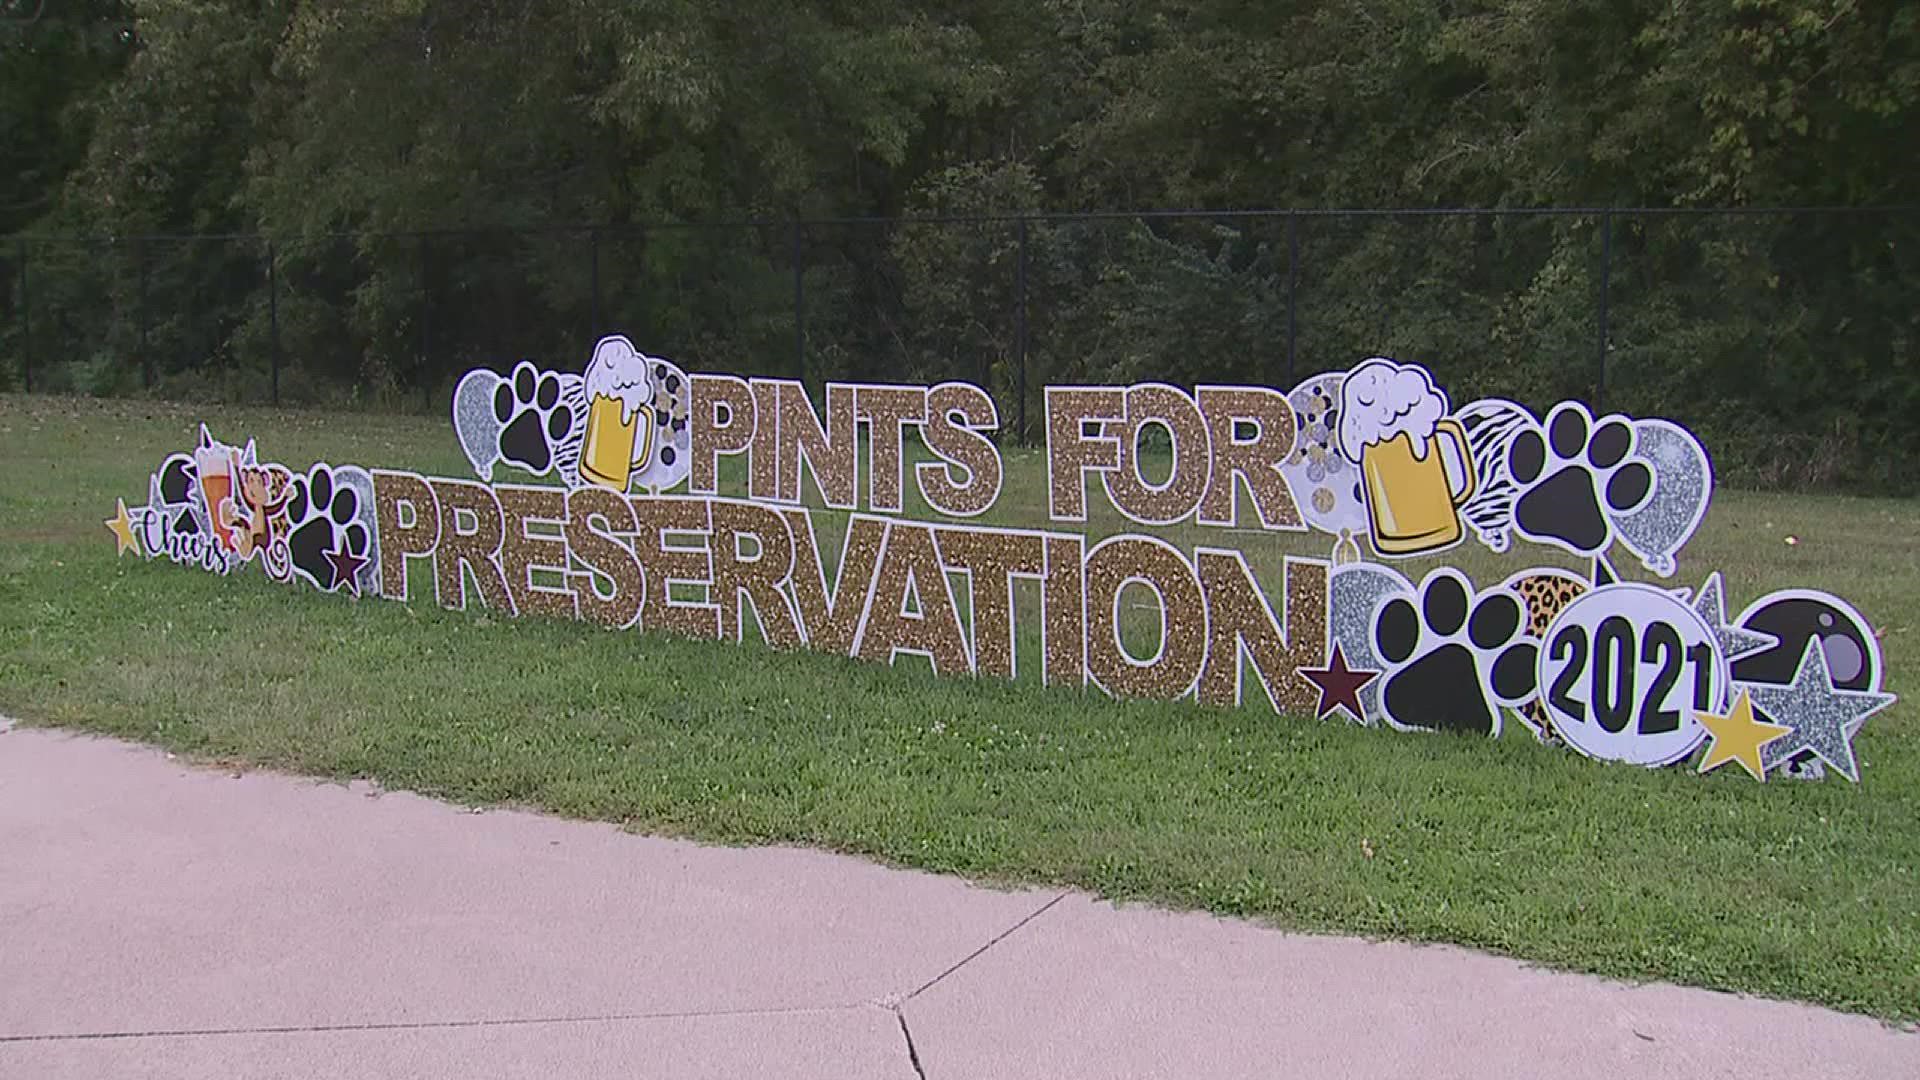 The return of Pints for Preservation at Niabi Zoo helped raise money for their new painted dog exhibit.